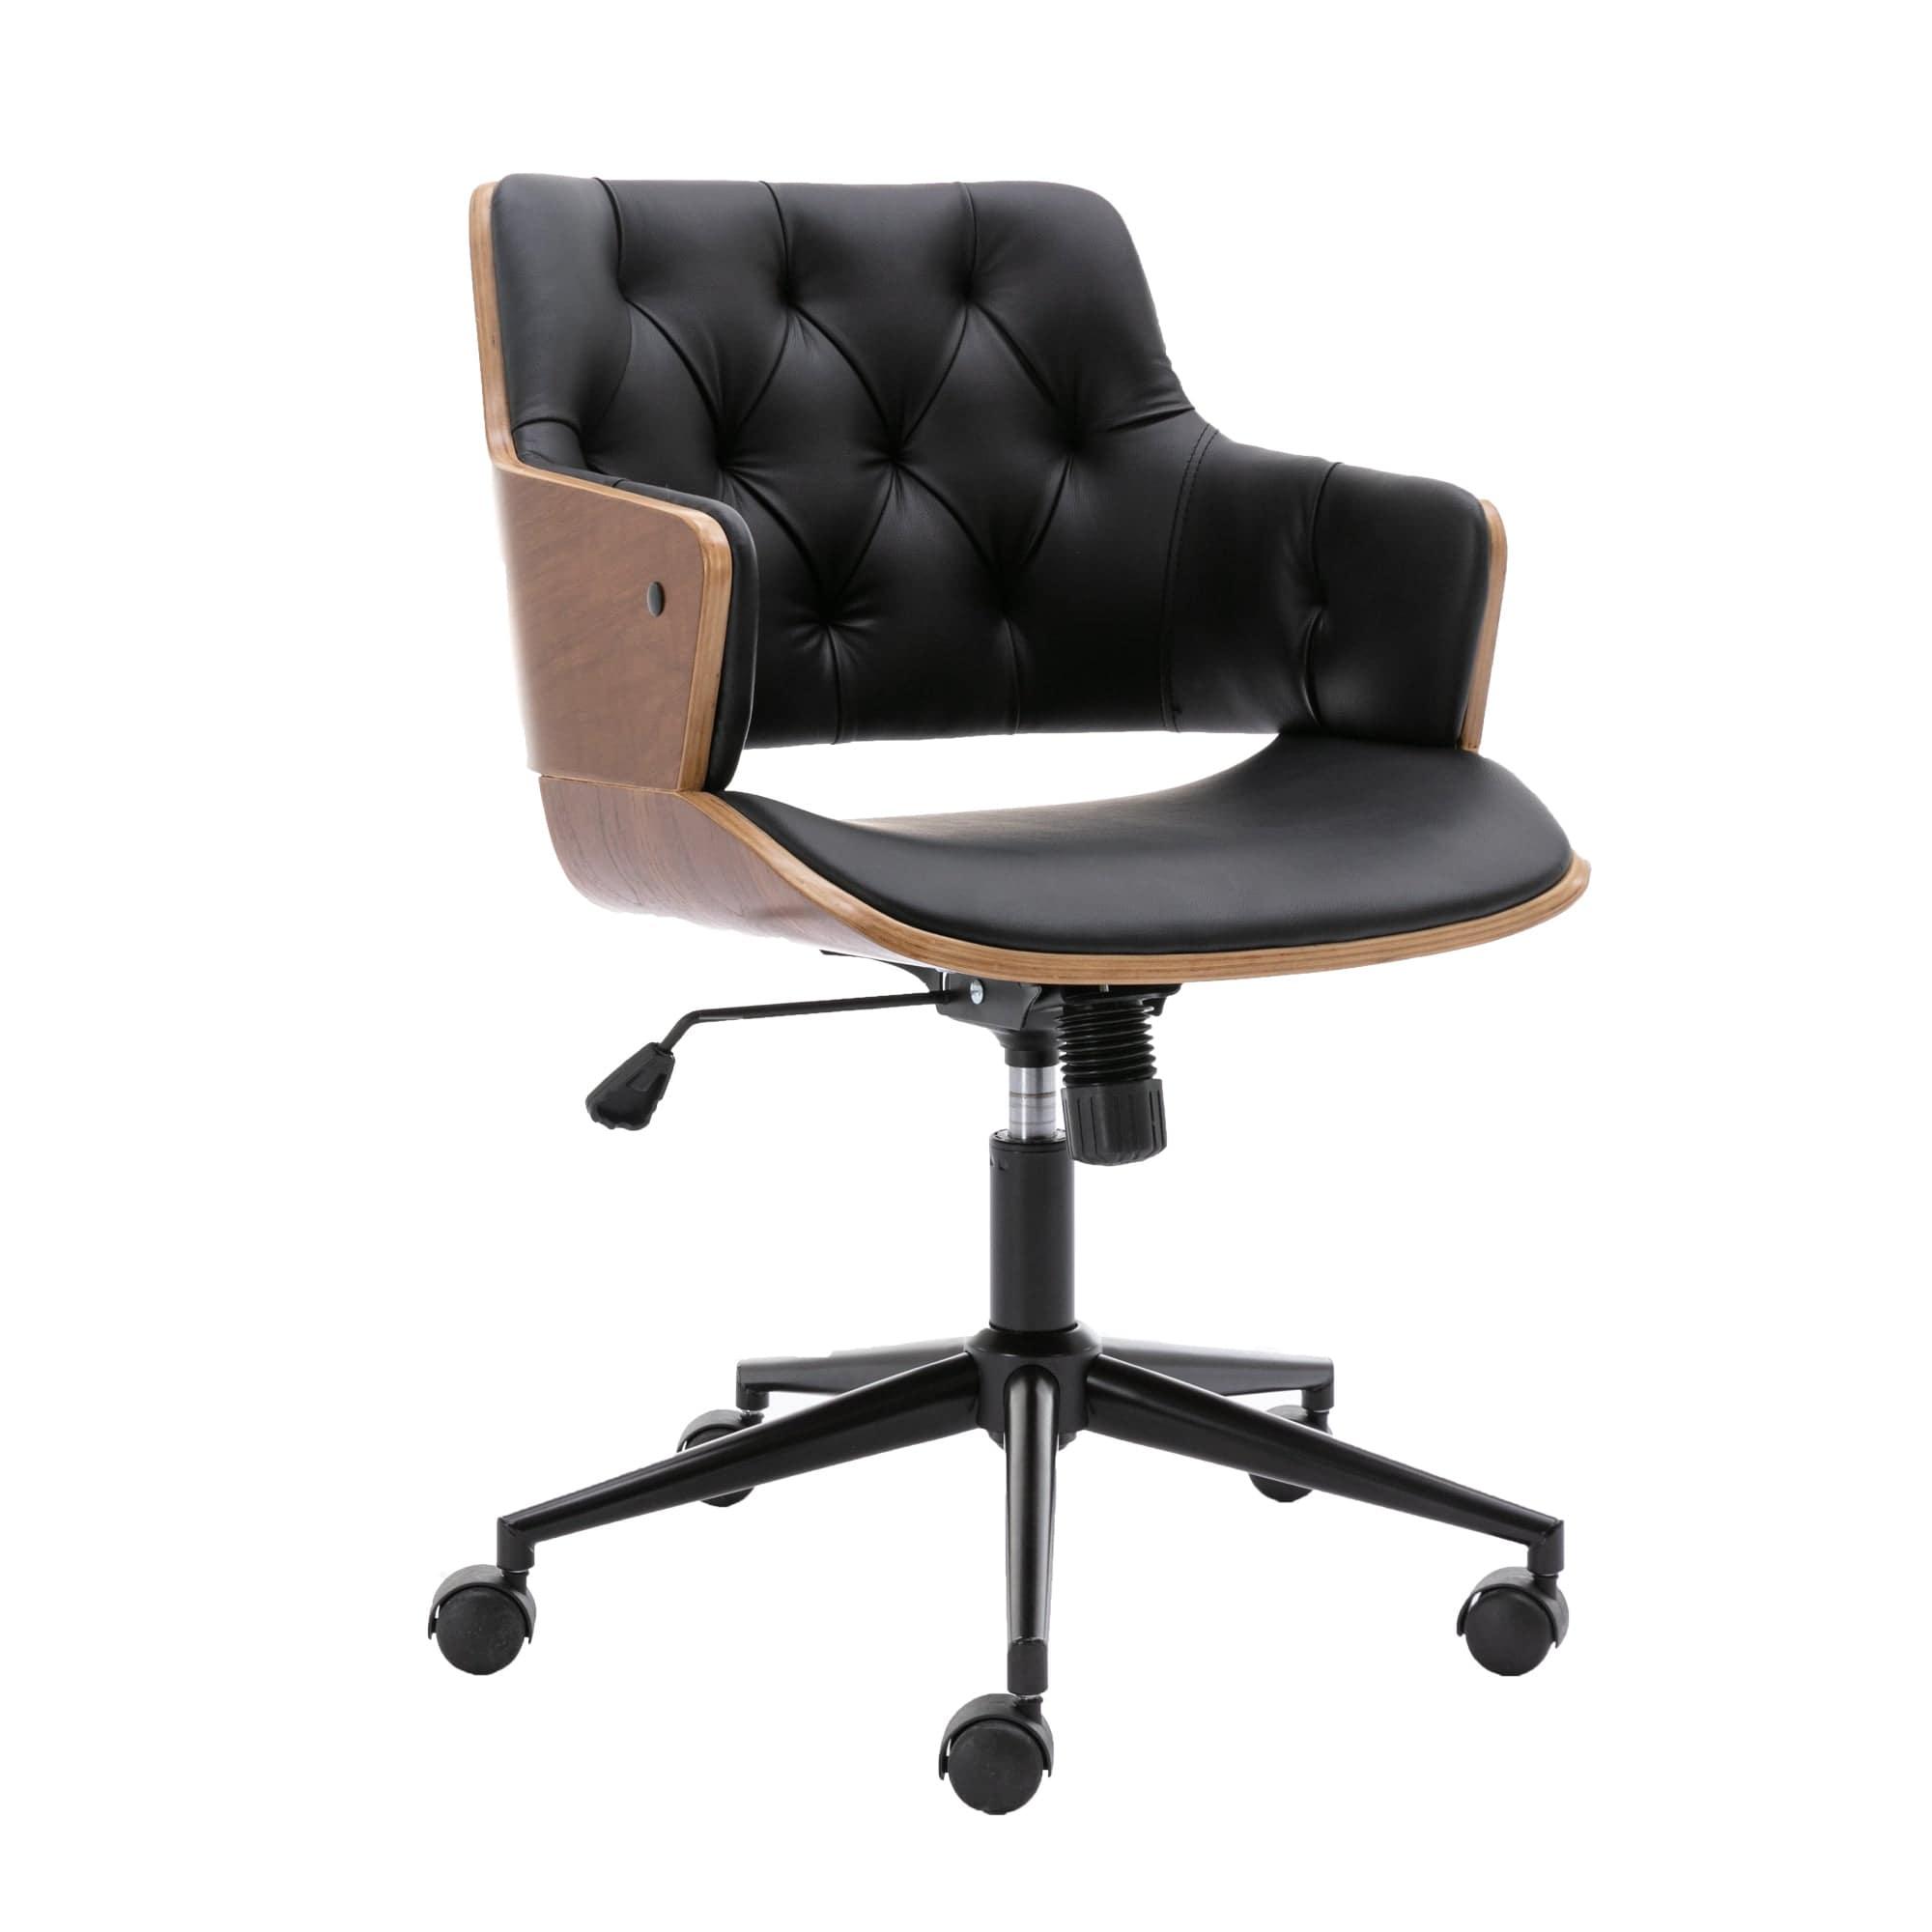 Shop HengMing Bentwood Adjustable Office Chair , black PU Leather Upholstery and black foot Mademoiselle Home Decor